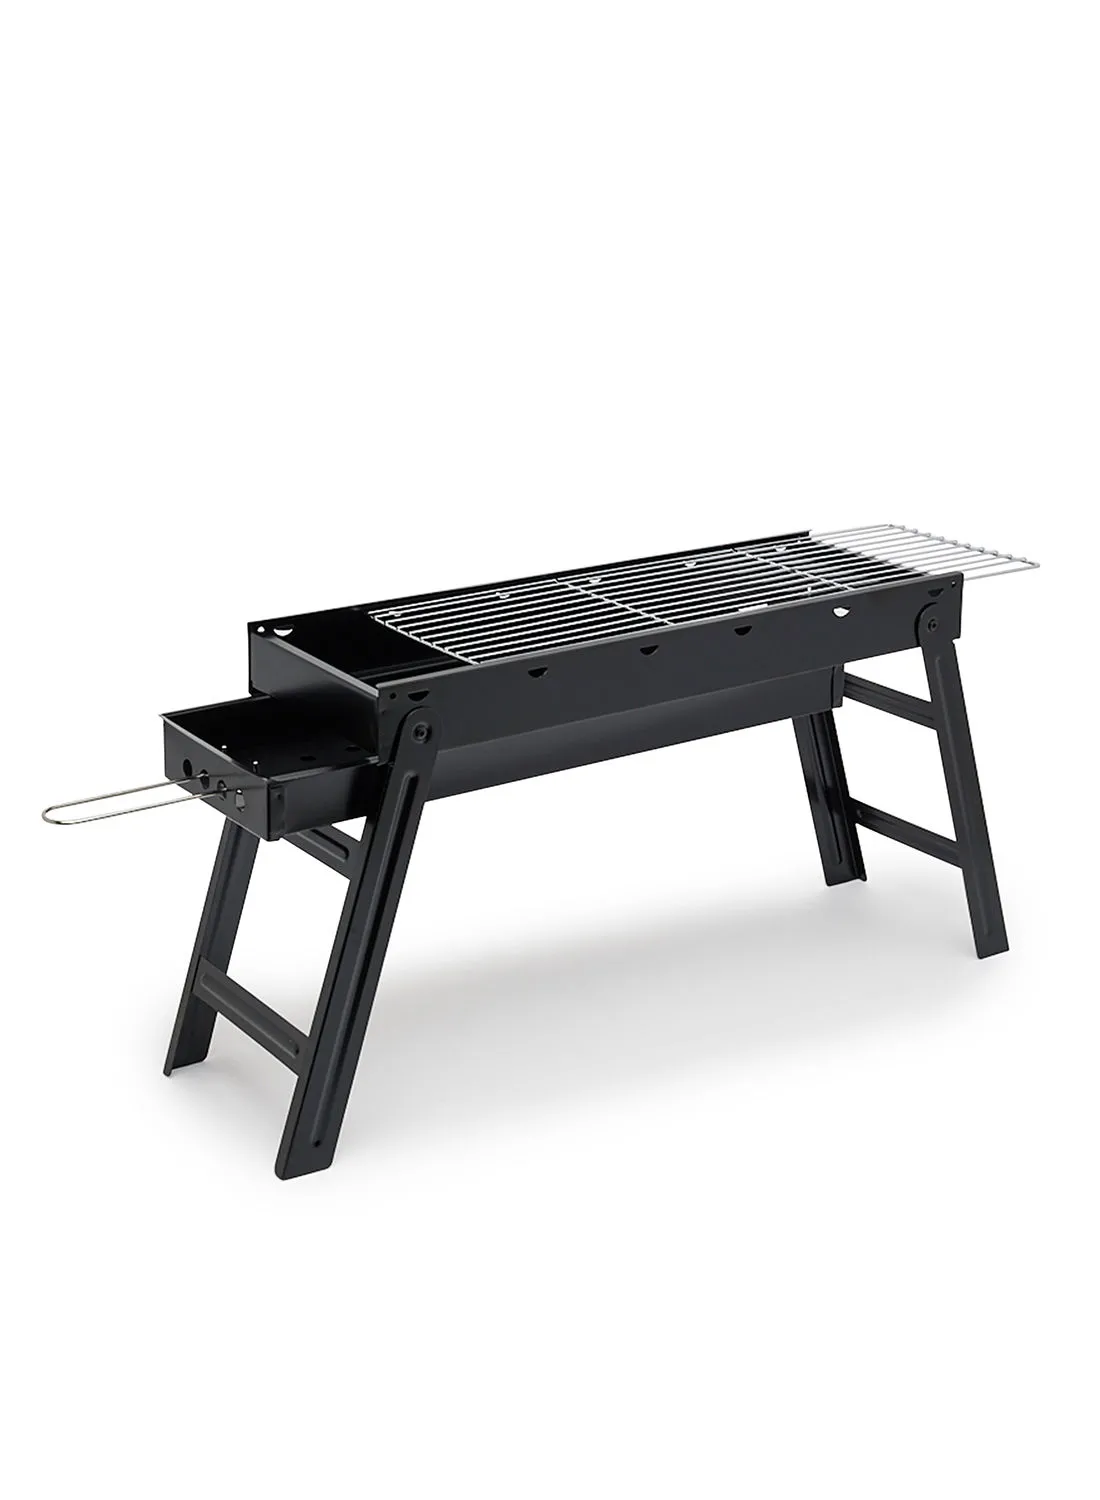 Noon East Portable Charcoal BBQ Grill With Foldable Legs Black/Rectangle